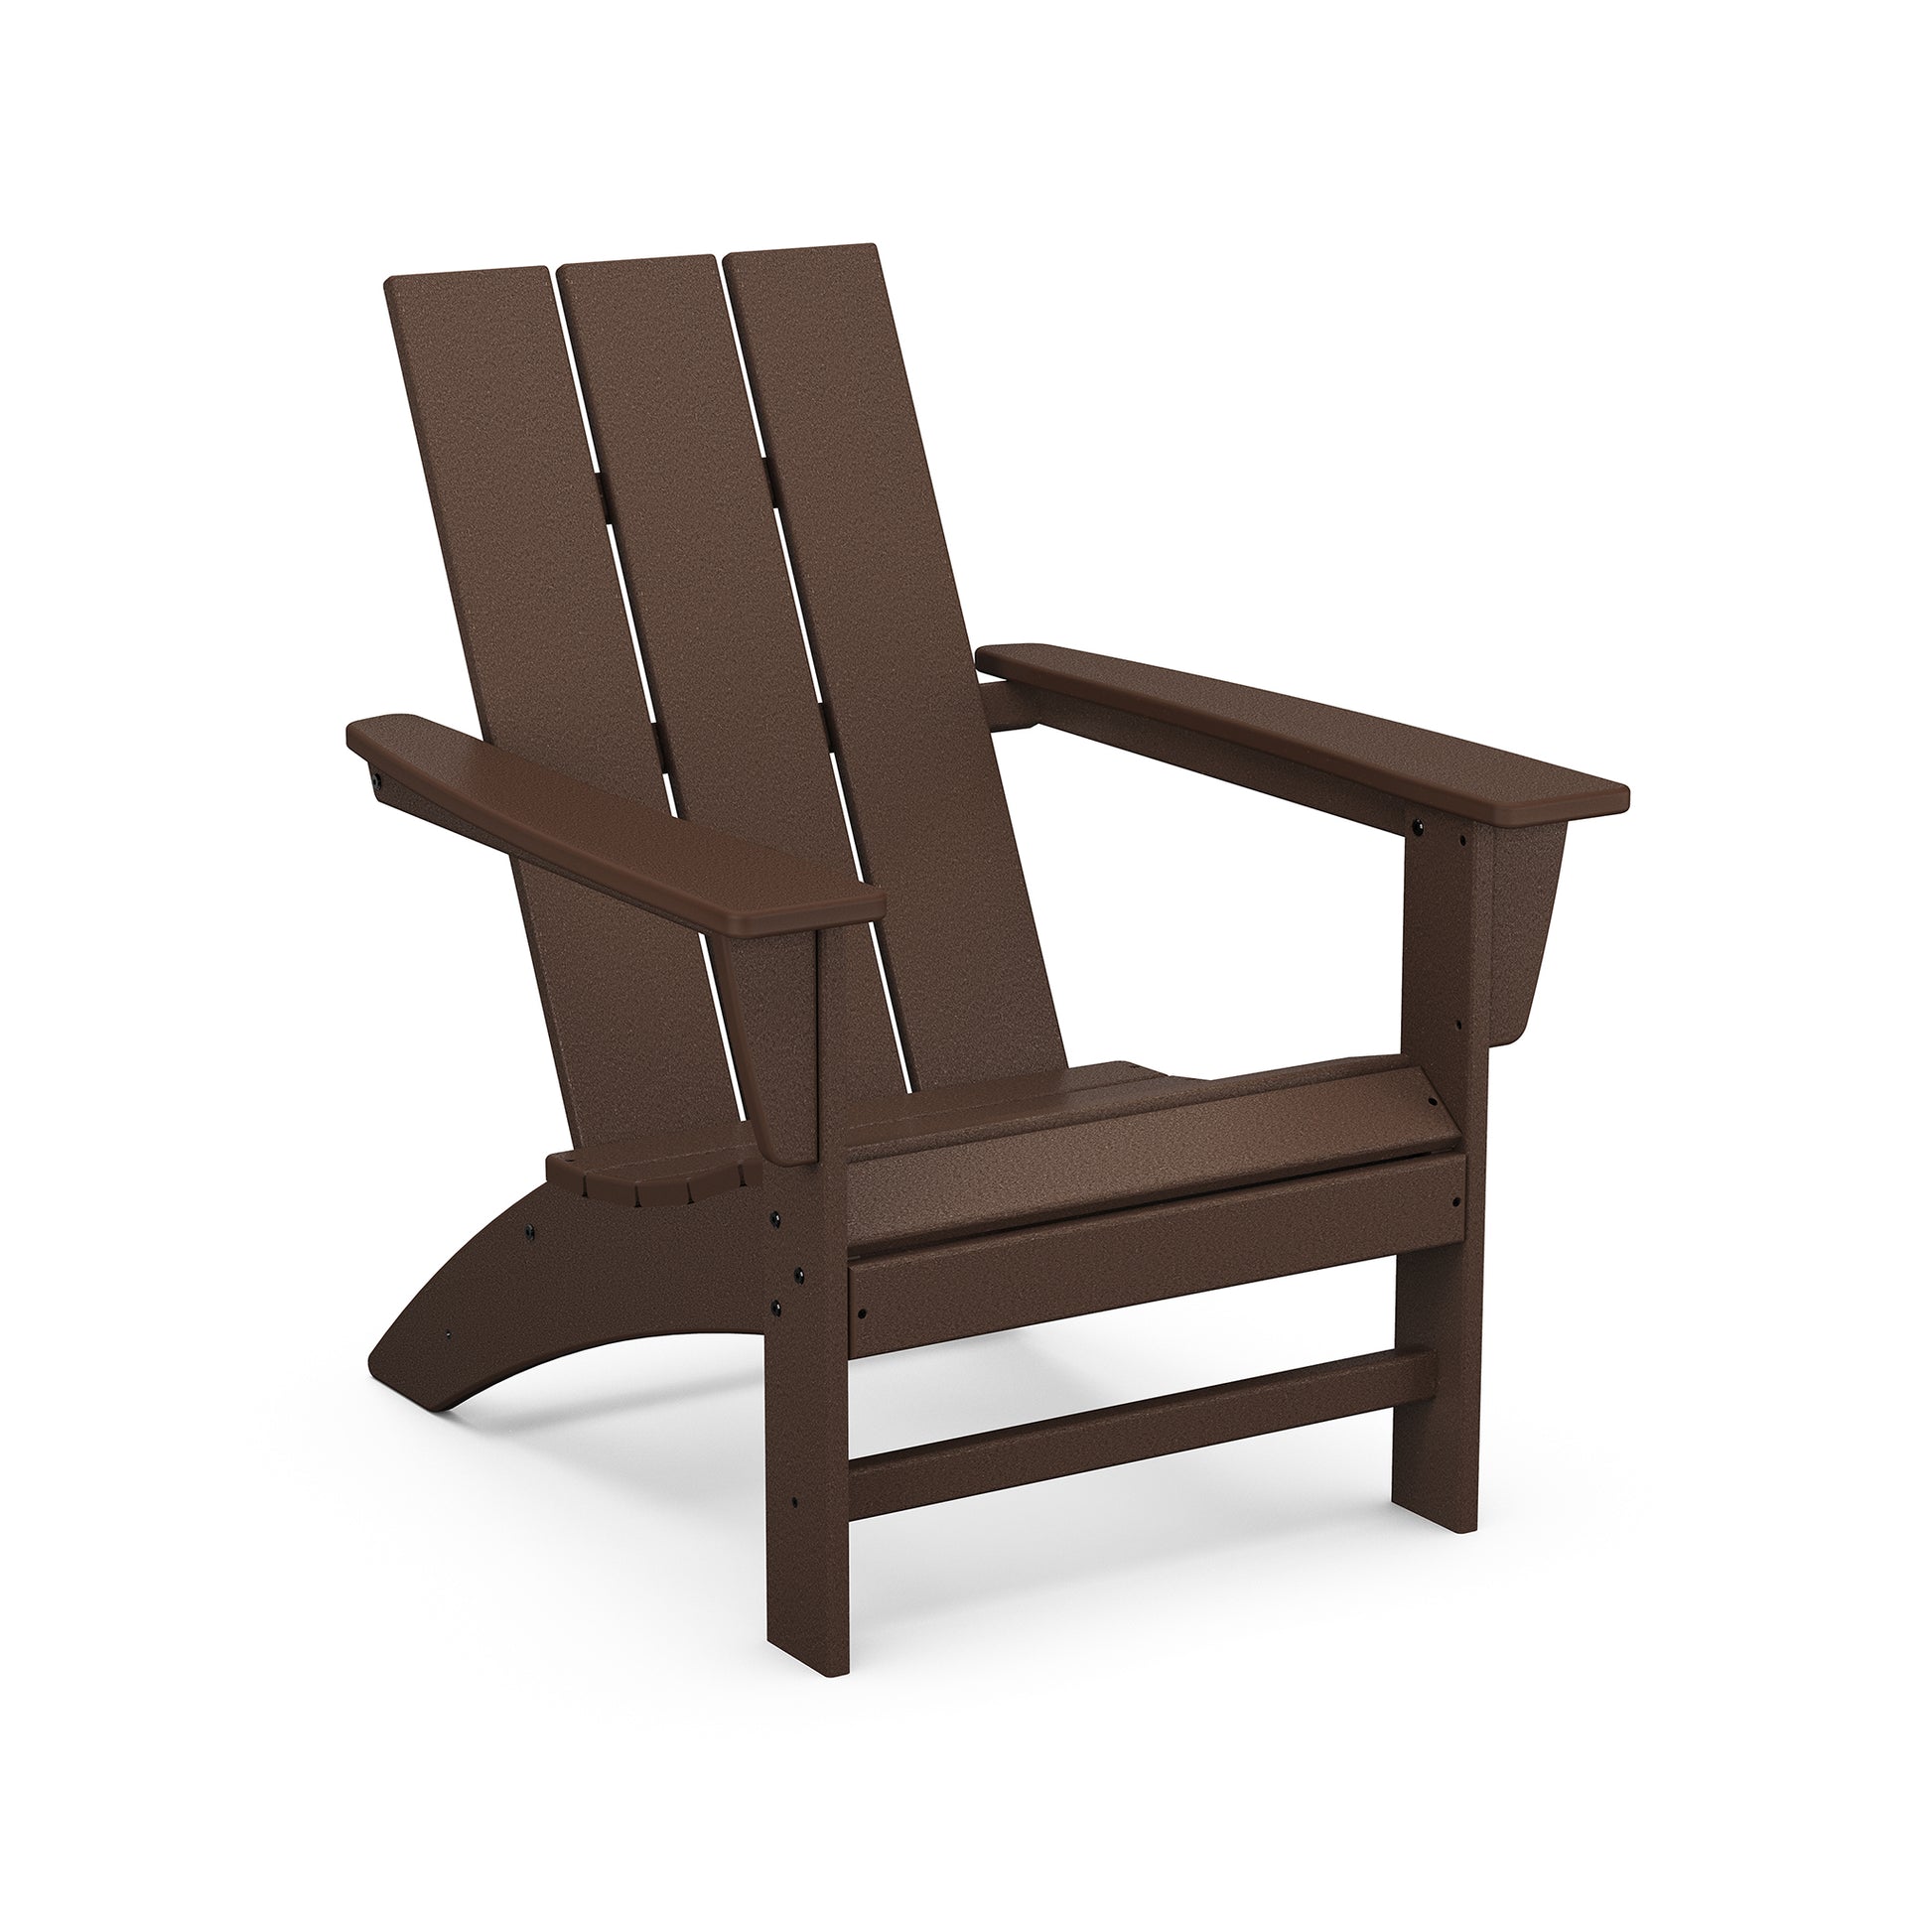 A Modern Adirondack chair made from POLYWOOD lumber on a white background.